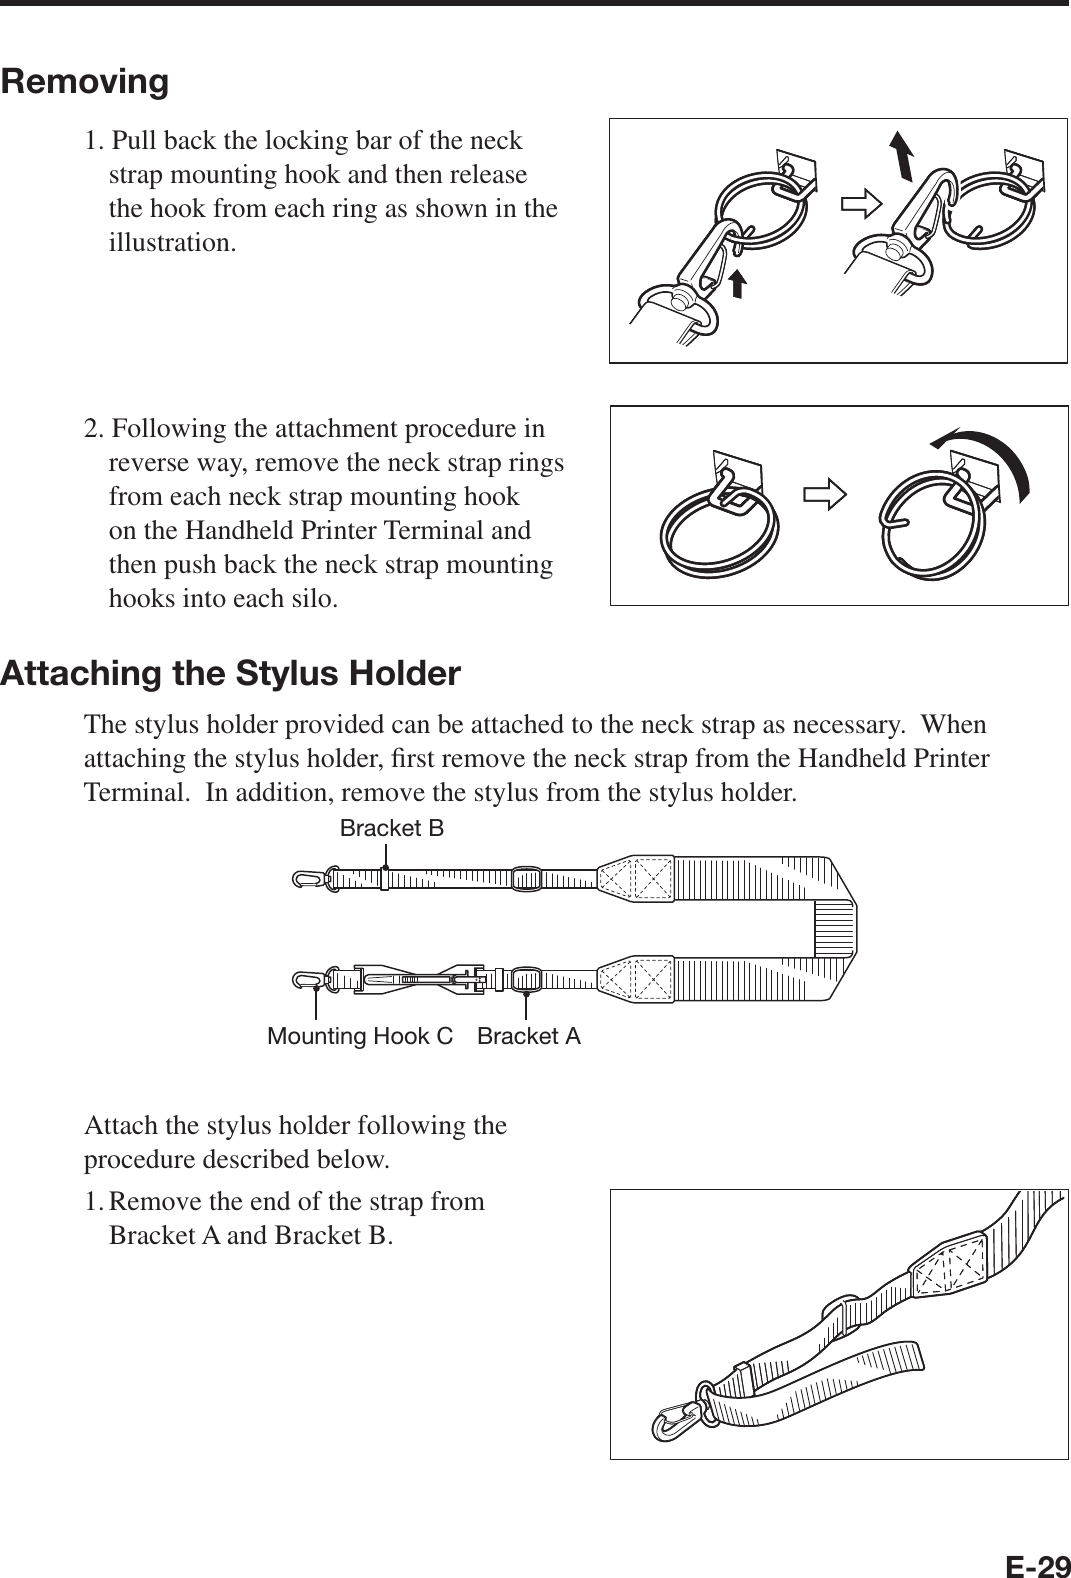 E-29Removing1. Pull back the locking bar of the neck strap mounting hook and then release the hook from each ring as shown in the illustration.2. Following the attachment procedure in reverse way, remove the neck strap rings from each neck strap mounting hook on the Handheld Printer Terminal and then push back the neck strap mounting hooks into each silo.Attaching the Stylus HolderThe stylus holder provided can be attached to the neck strap as necessary.  When attaching the stylus holder, ¿ rst remove the neck strap from the Handheld Printer Terminal.  In addition, remove the stylus from the stylus holder.Bracket AMounting Hook CBracket BAttach the stylus holder following the procedure described below.1. Remove the end of the strap from Bracket A and Bracket B.